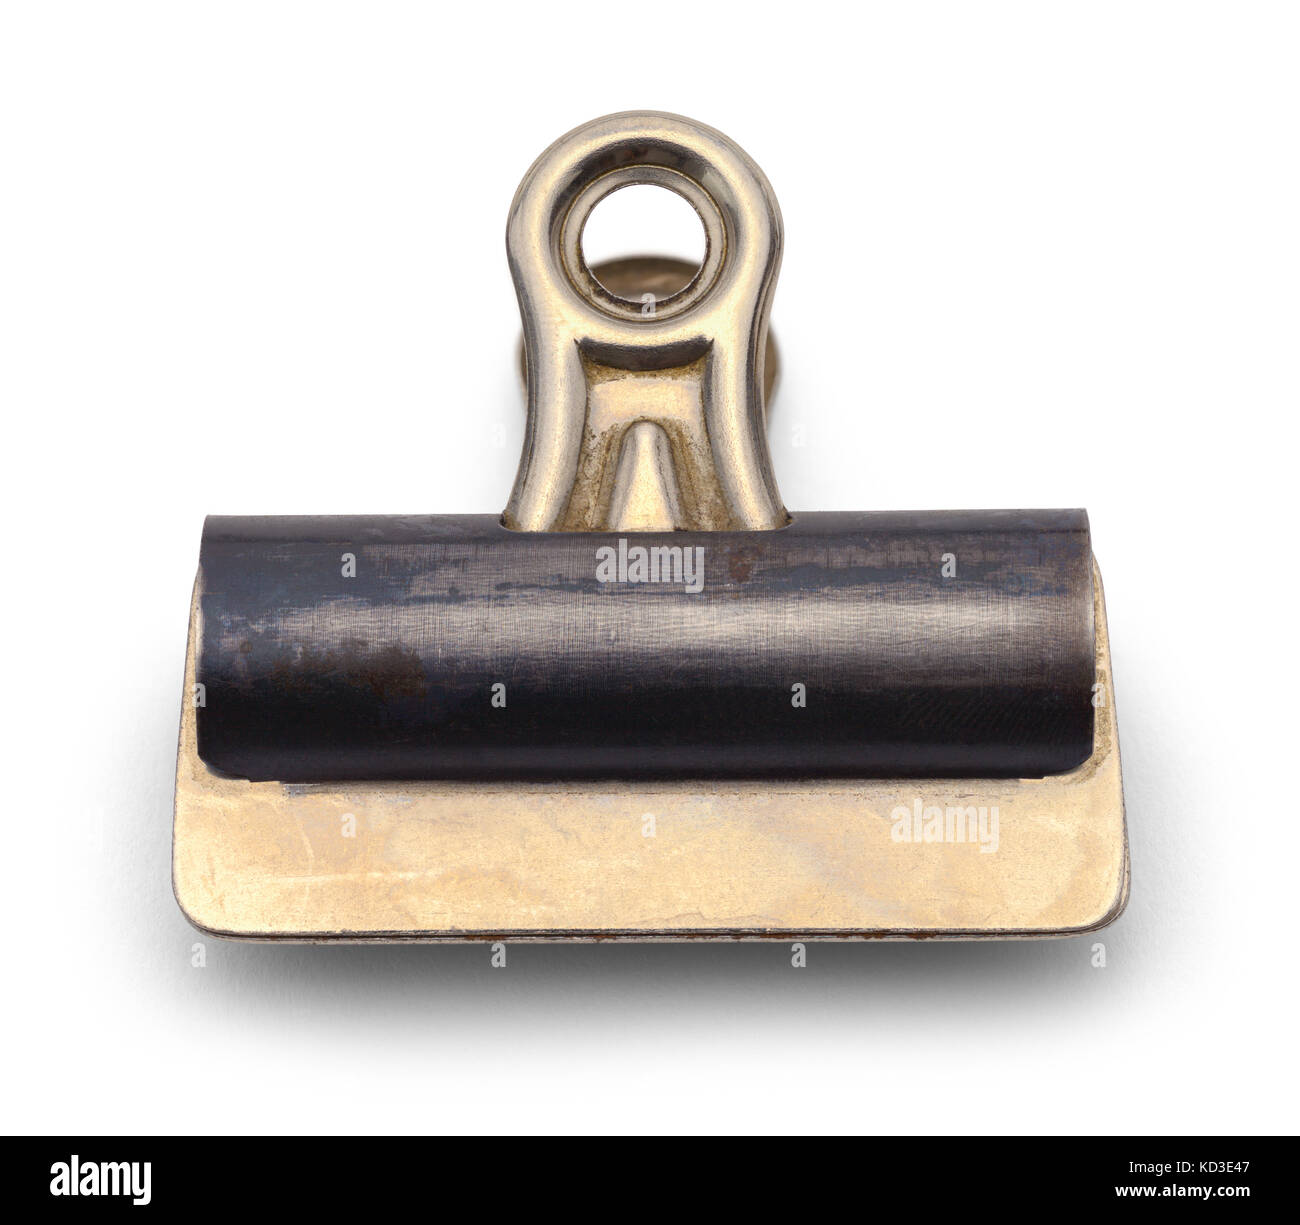 Old Large Metal Binder Clip Isolated on a White Background Stock Photo -  Alamy